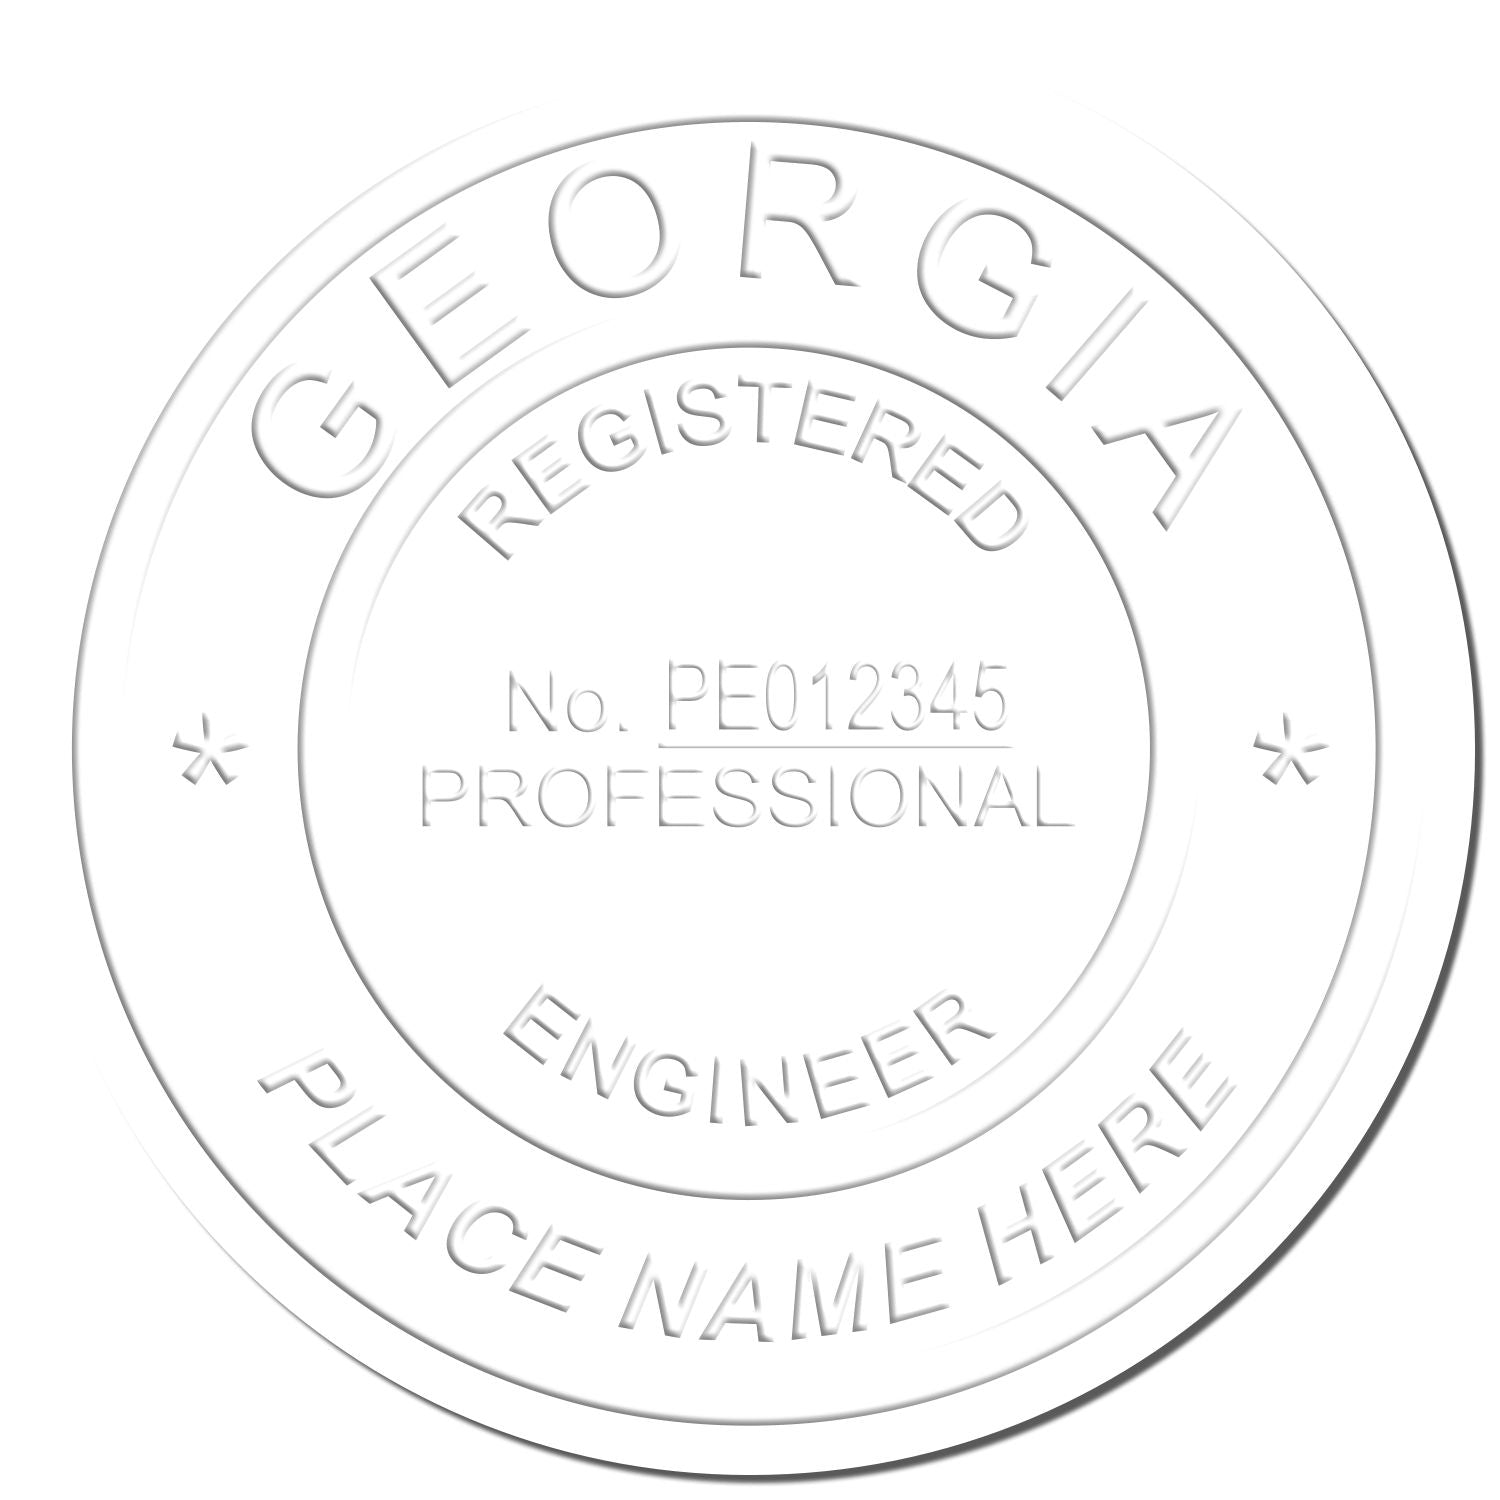 The main image for the Georgia Engineer Desk Seal depicting a sample of the imprint and electronic files